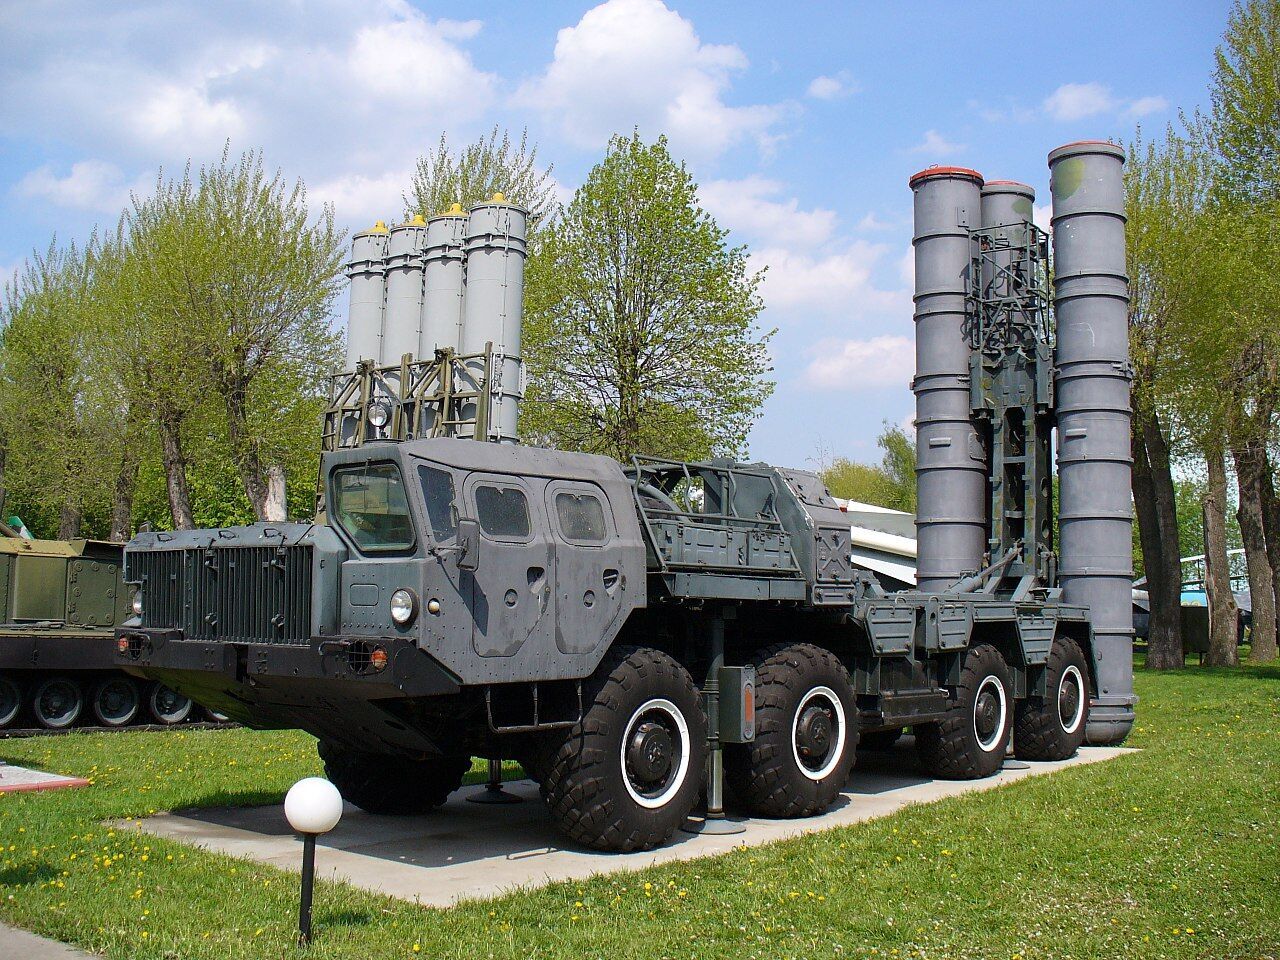 S-300 air defence system is on its way to shoot down a Russian missile - main features, photos and video